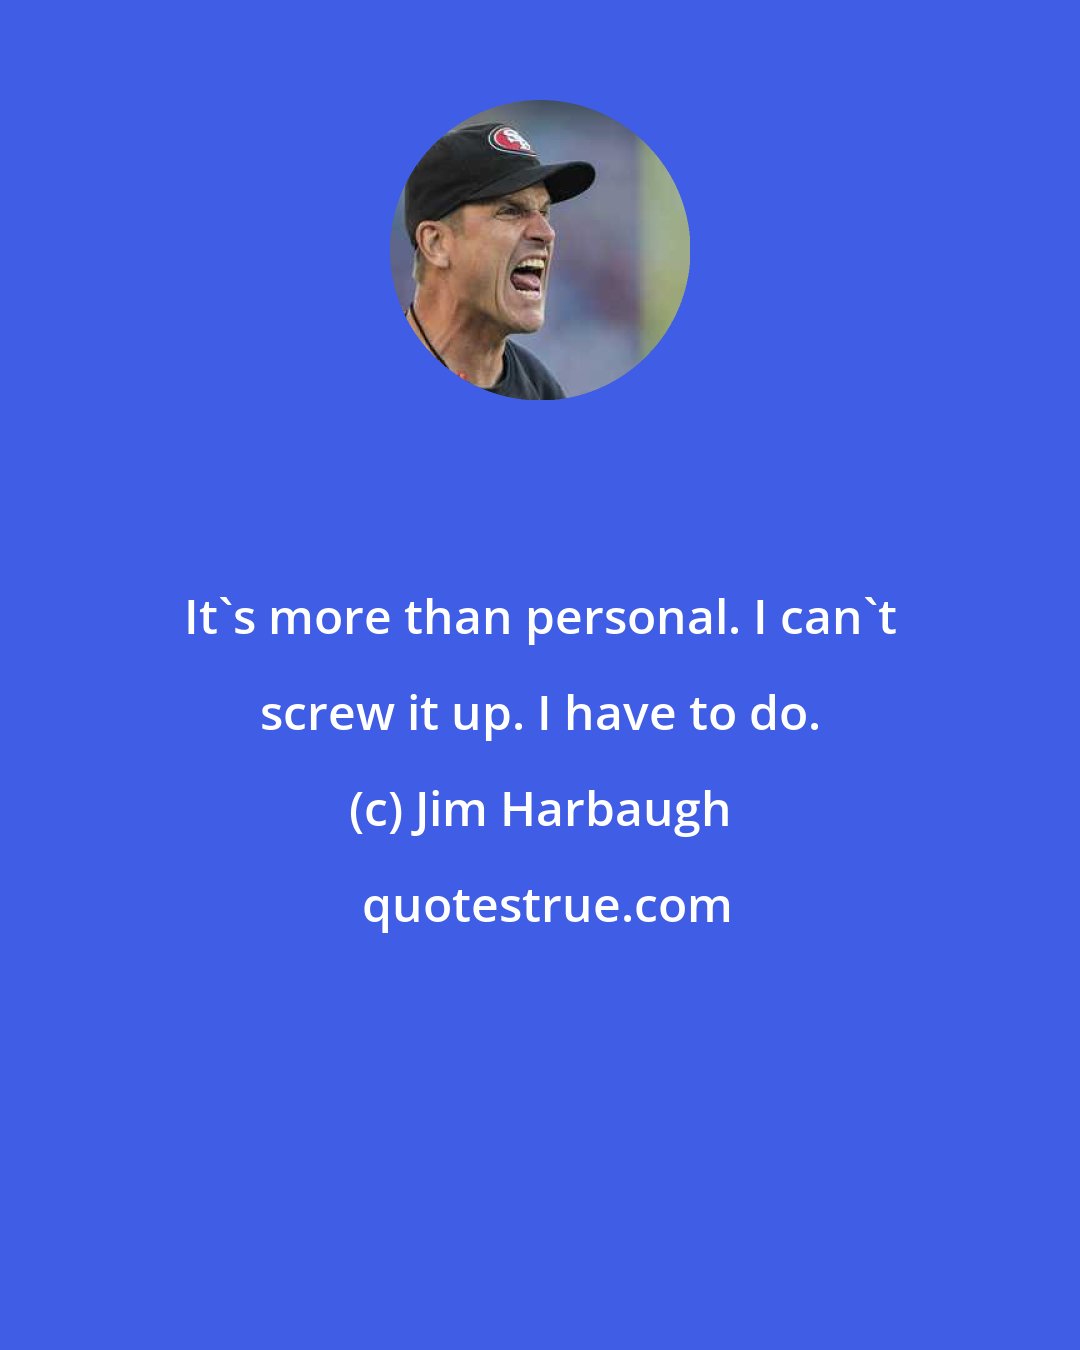 Jim Harbaugh: It's more than personal. I can't screw it up. I have to do.